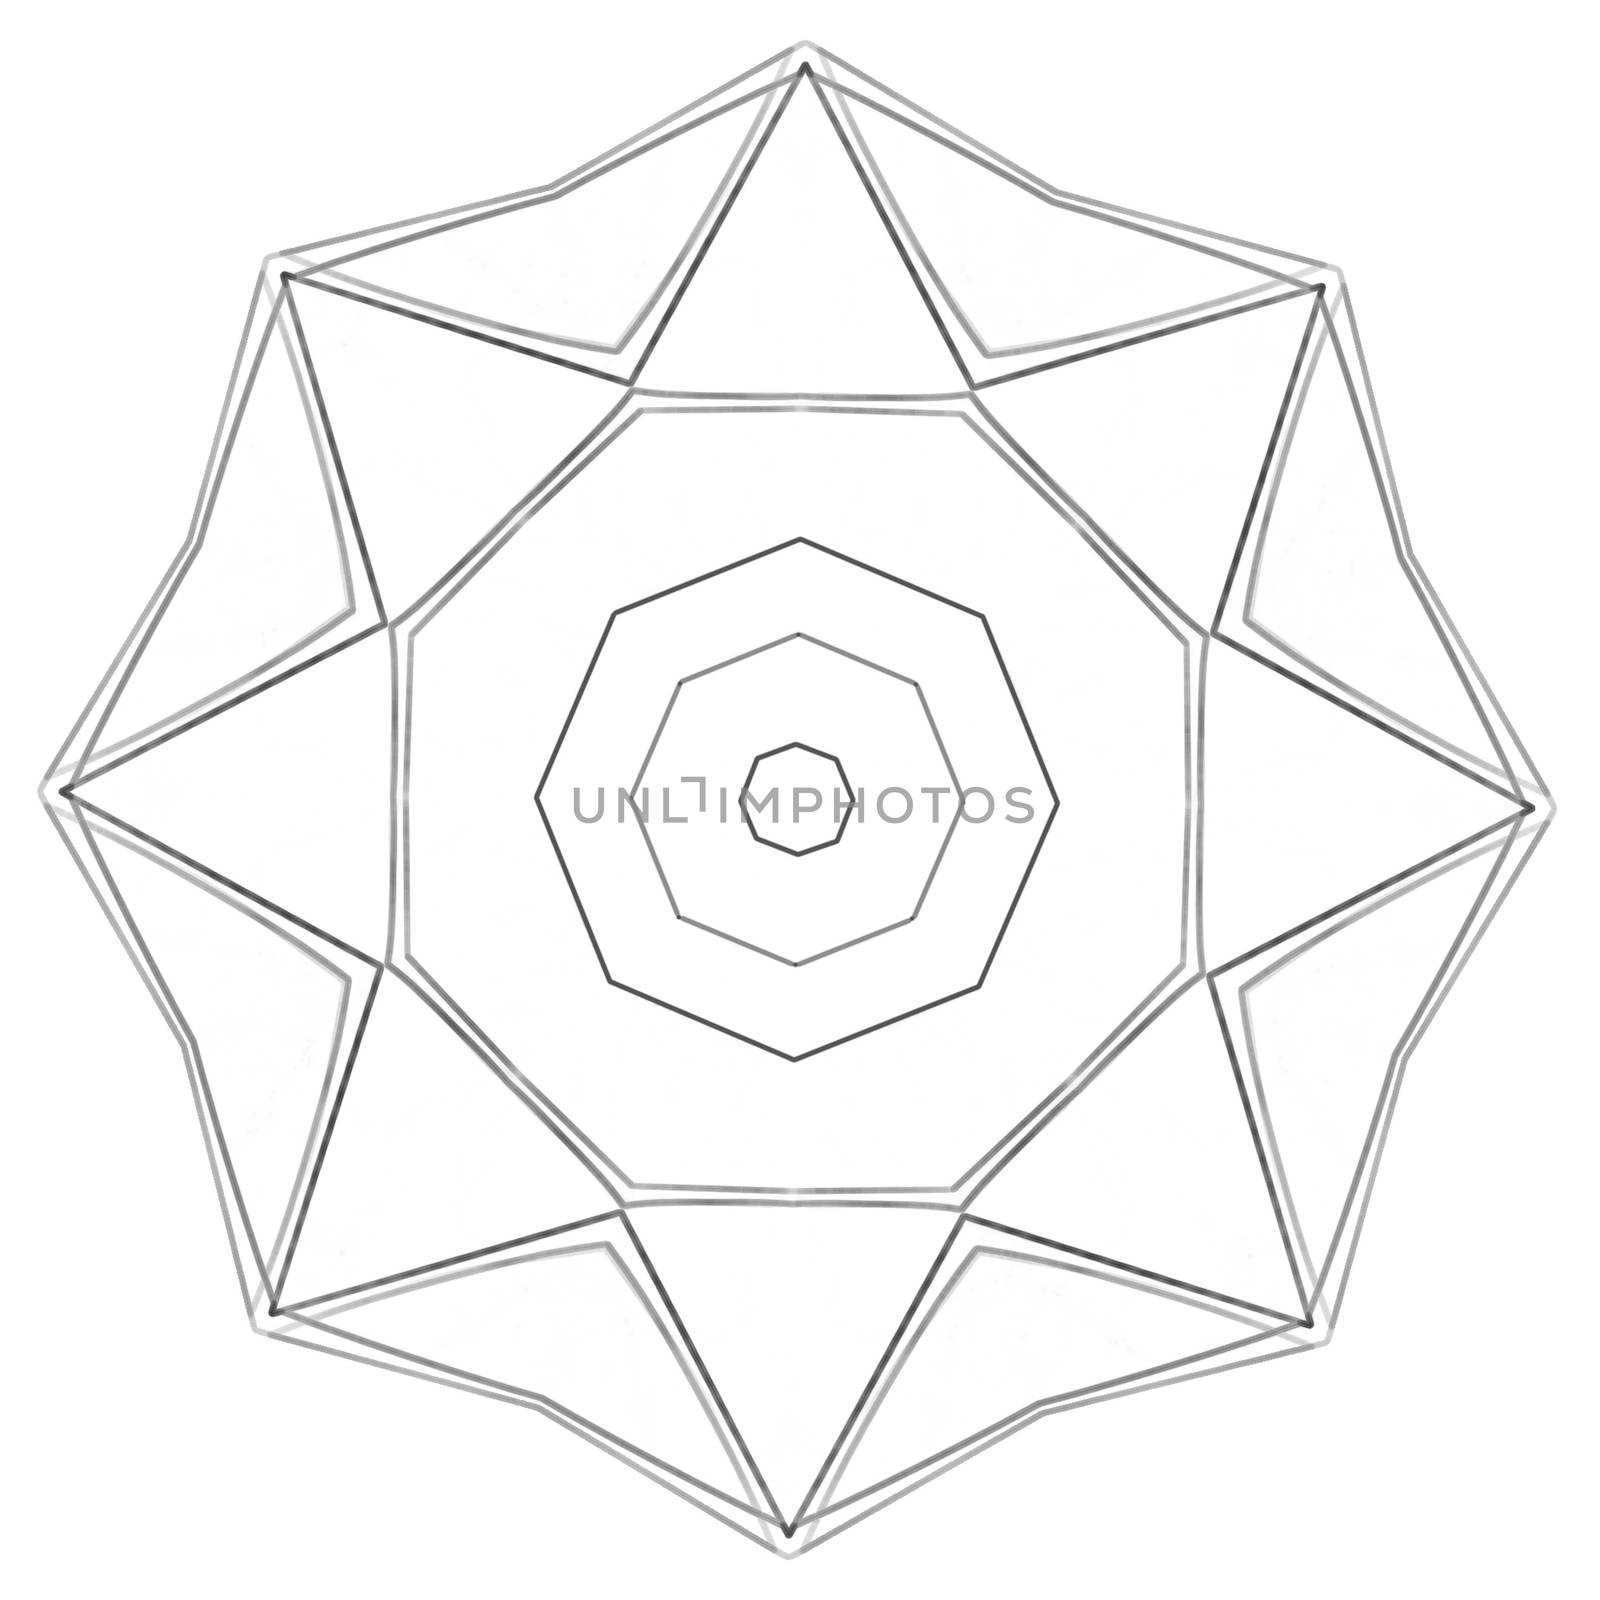 Illustration: Coloring Book Series: Octagon. Soft thin line. Print it and bring it to Life with Color! Fantastic Outline / Sketch / Line Art Design.